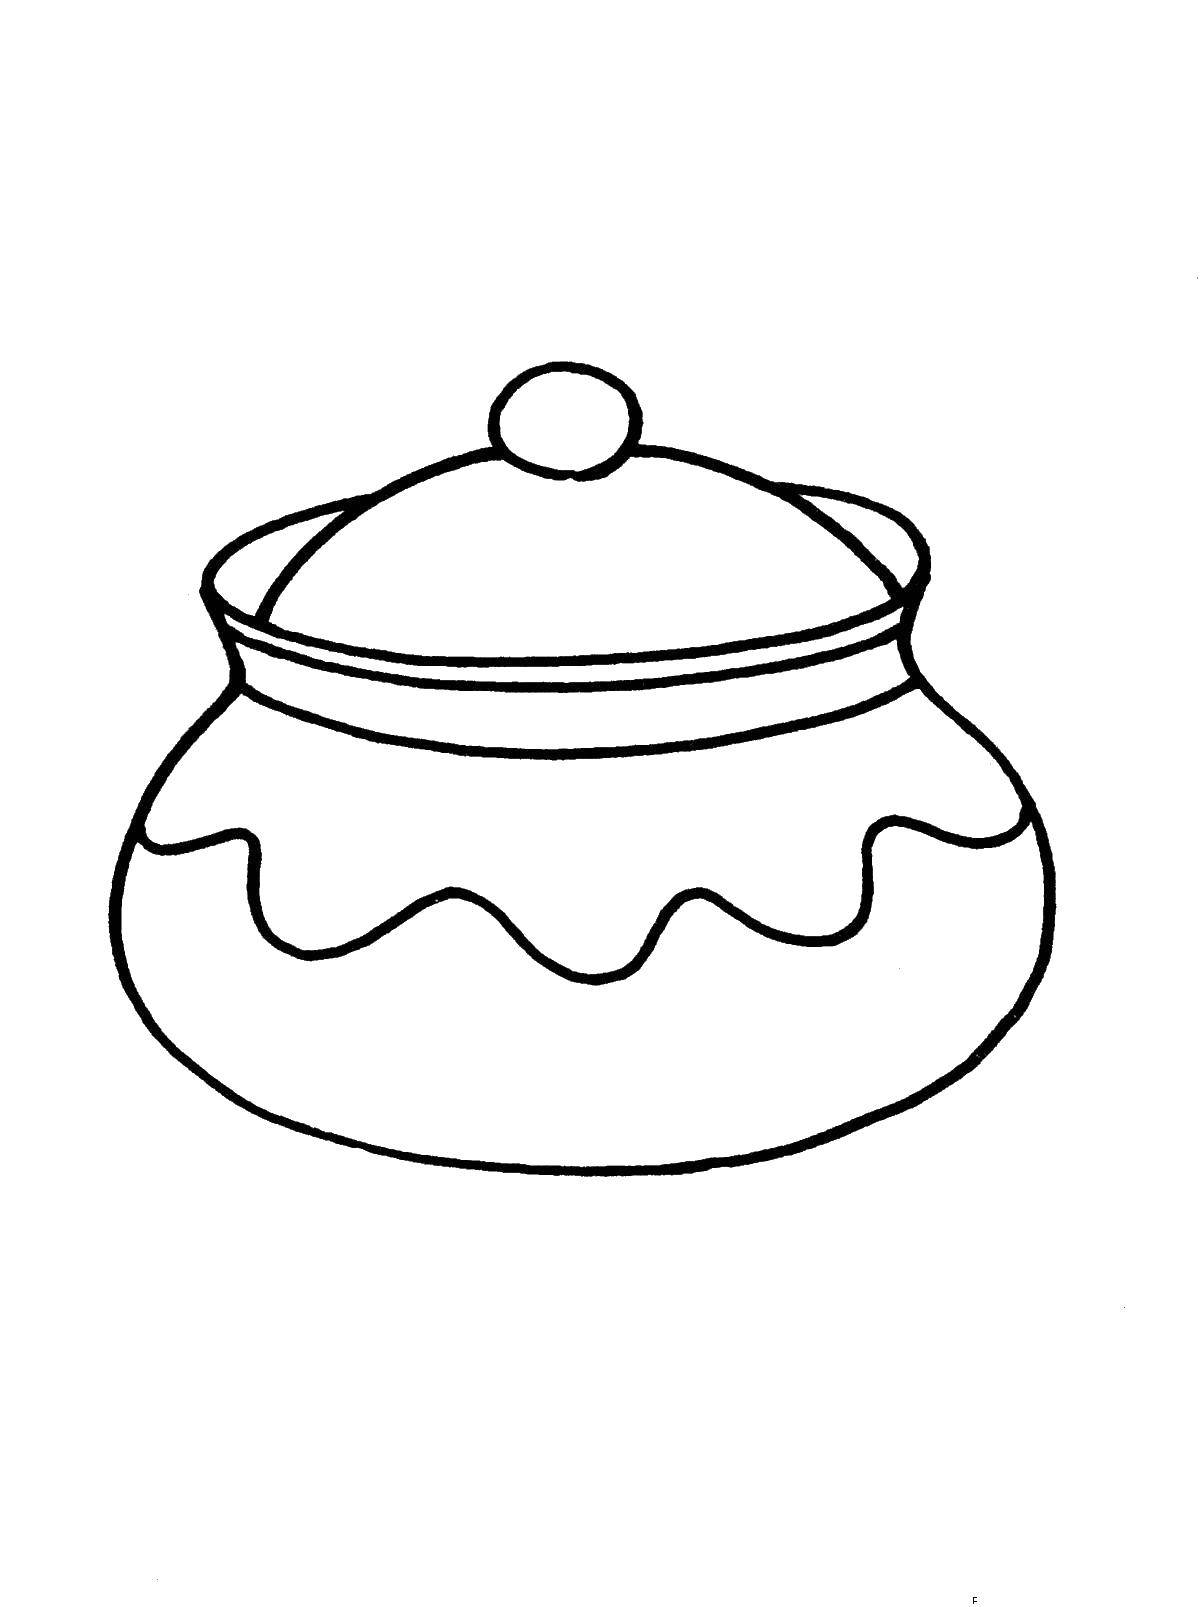 Coloring Sugar bowl. Category dishes. Tags:  Crockery, Cutlery.